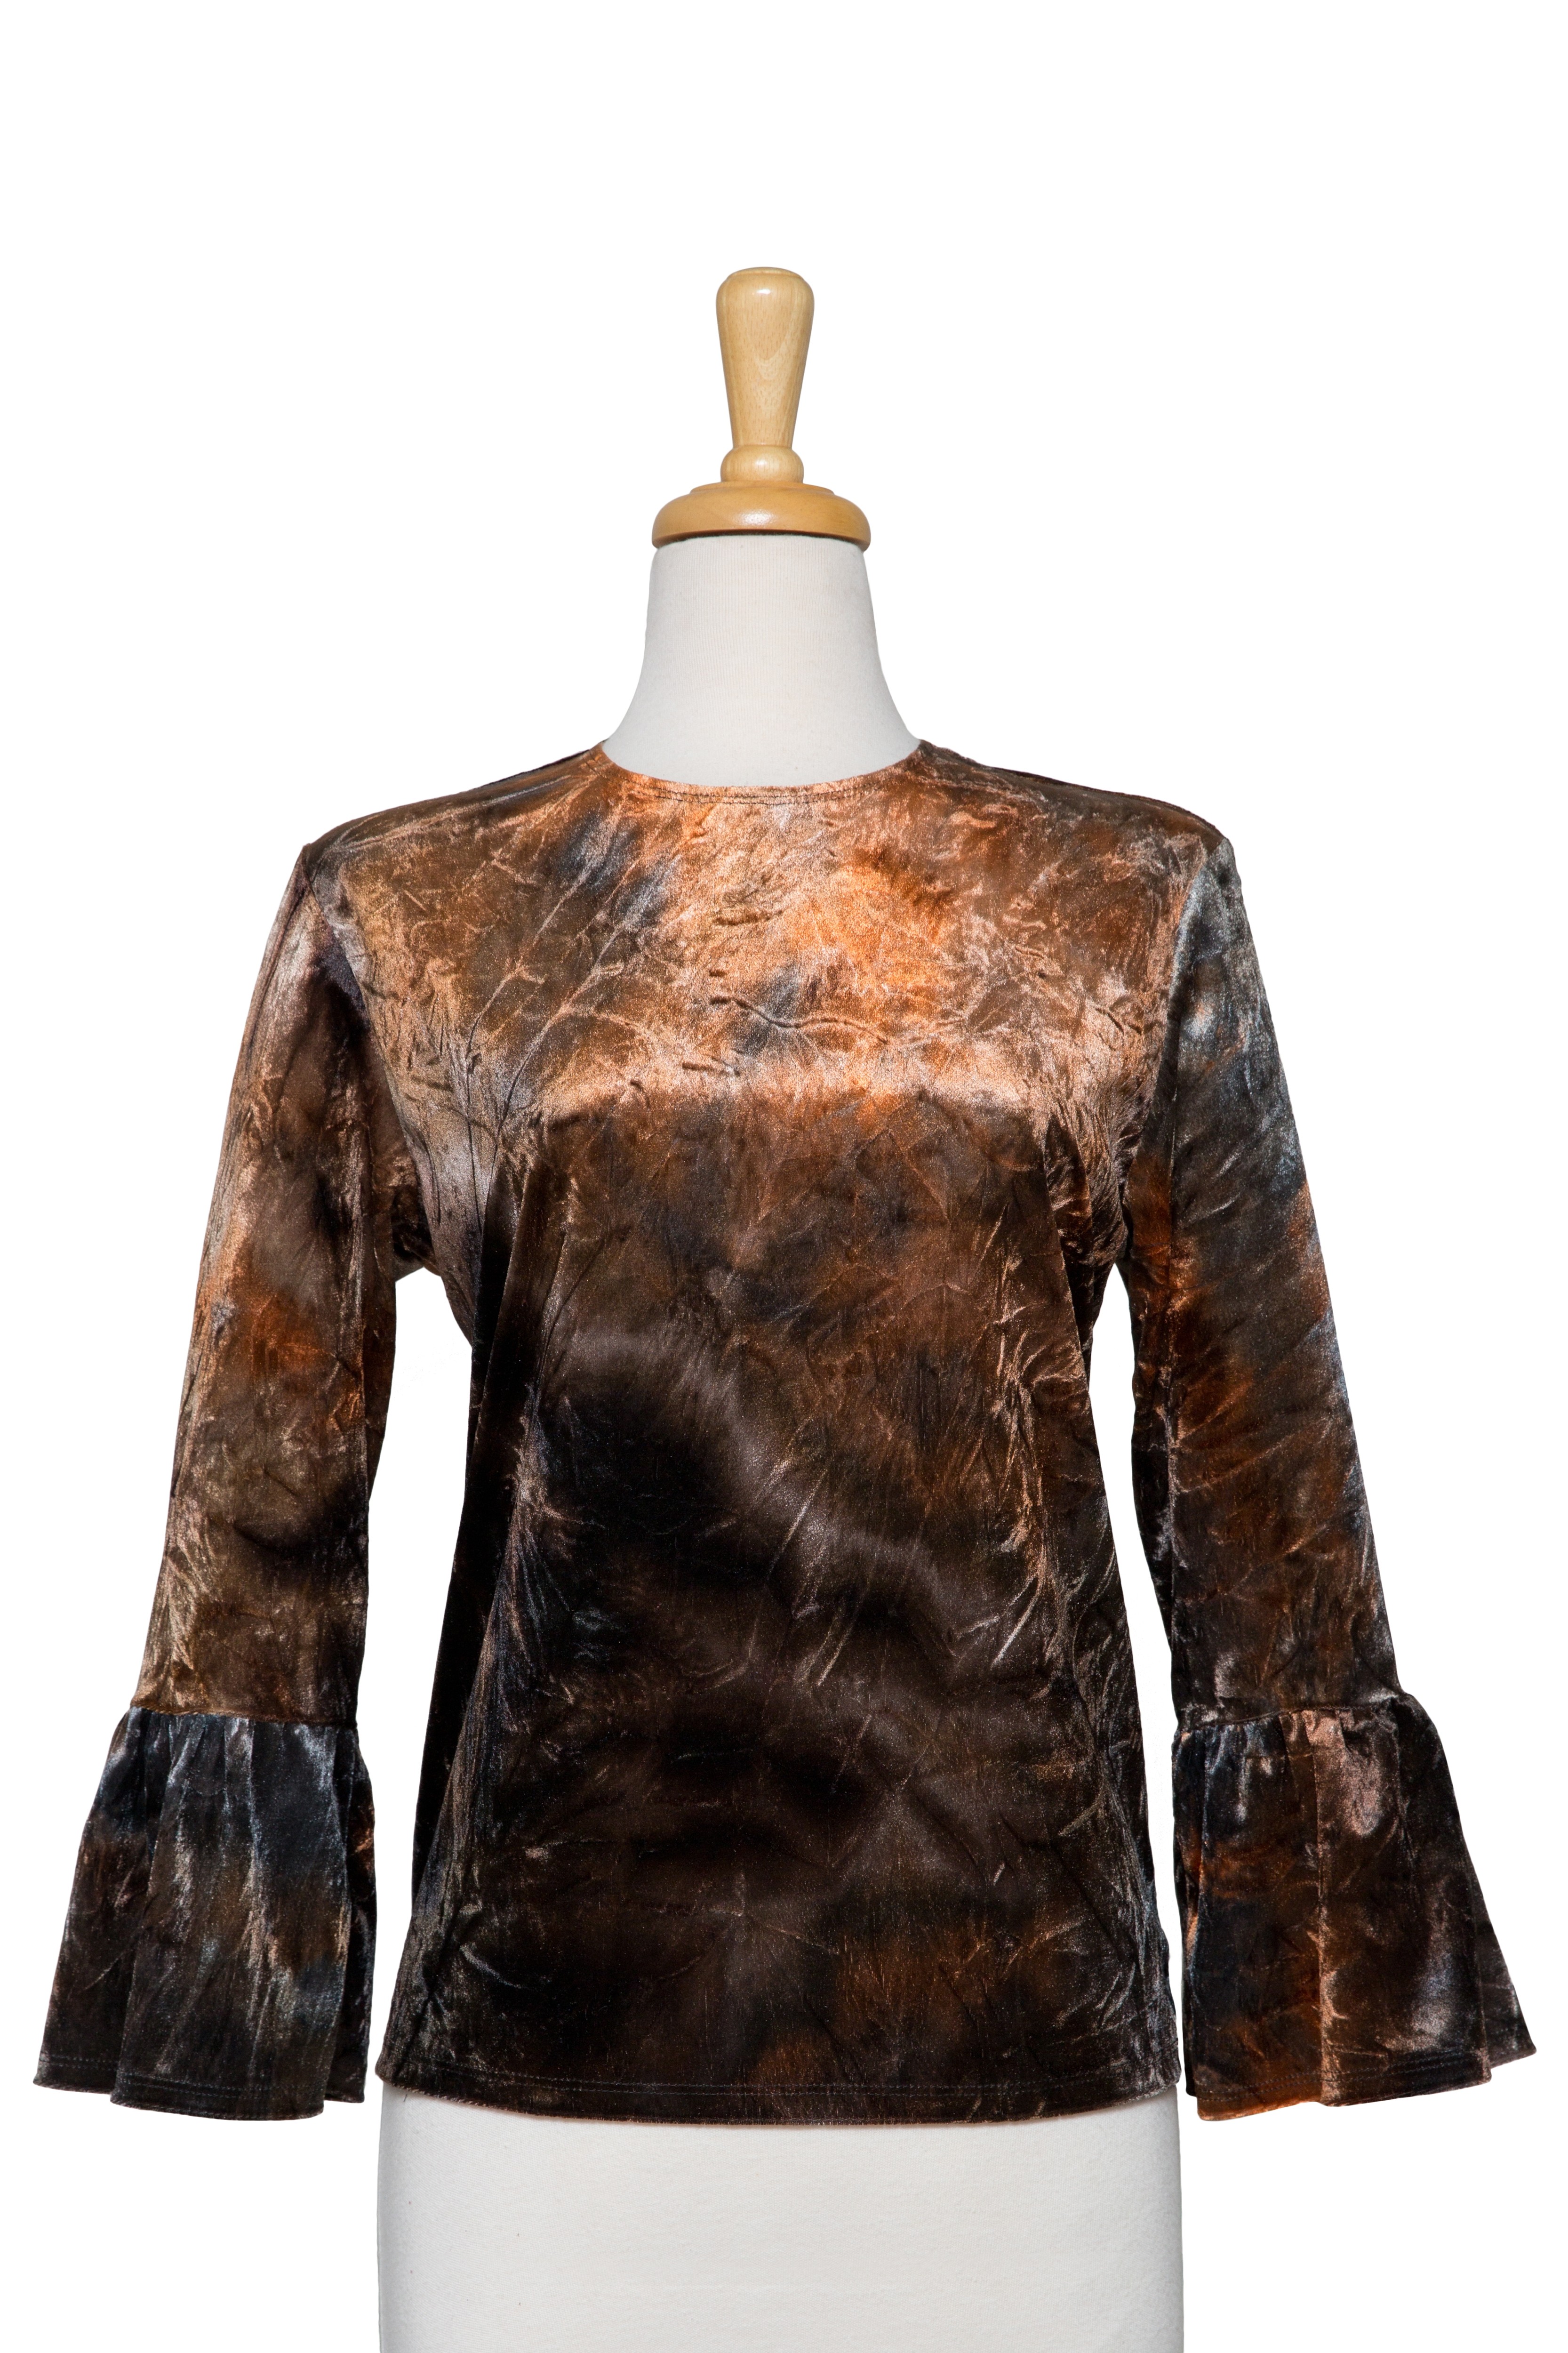 Charcoal and Copper Tie Dye Crushed Velvet Bell Sleeve Top